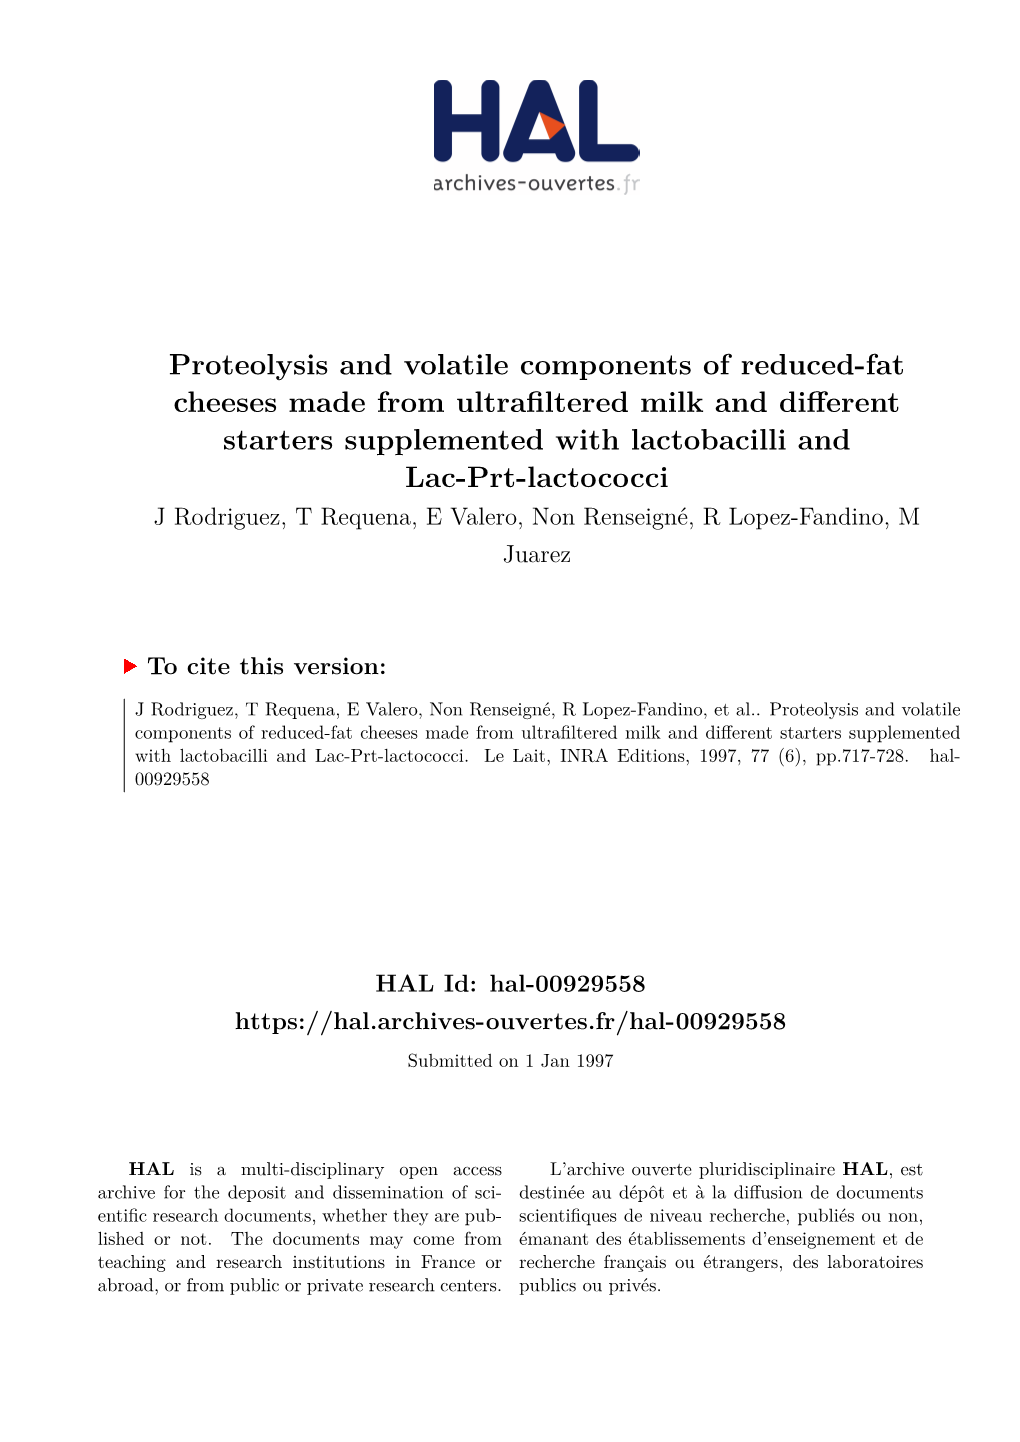 Proteolysis and Volatile Components of Reduced-Fat Cheeses Made from Ultrafiltered Milk and Different Starters Supplemented With